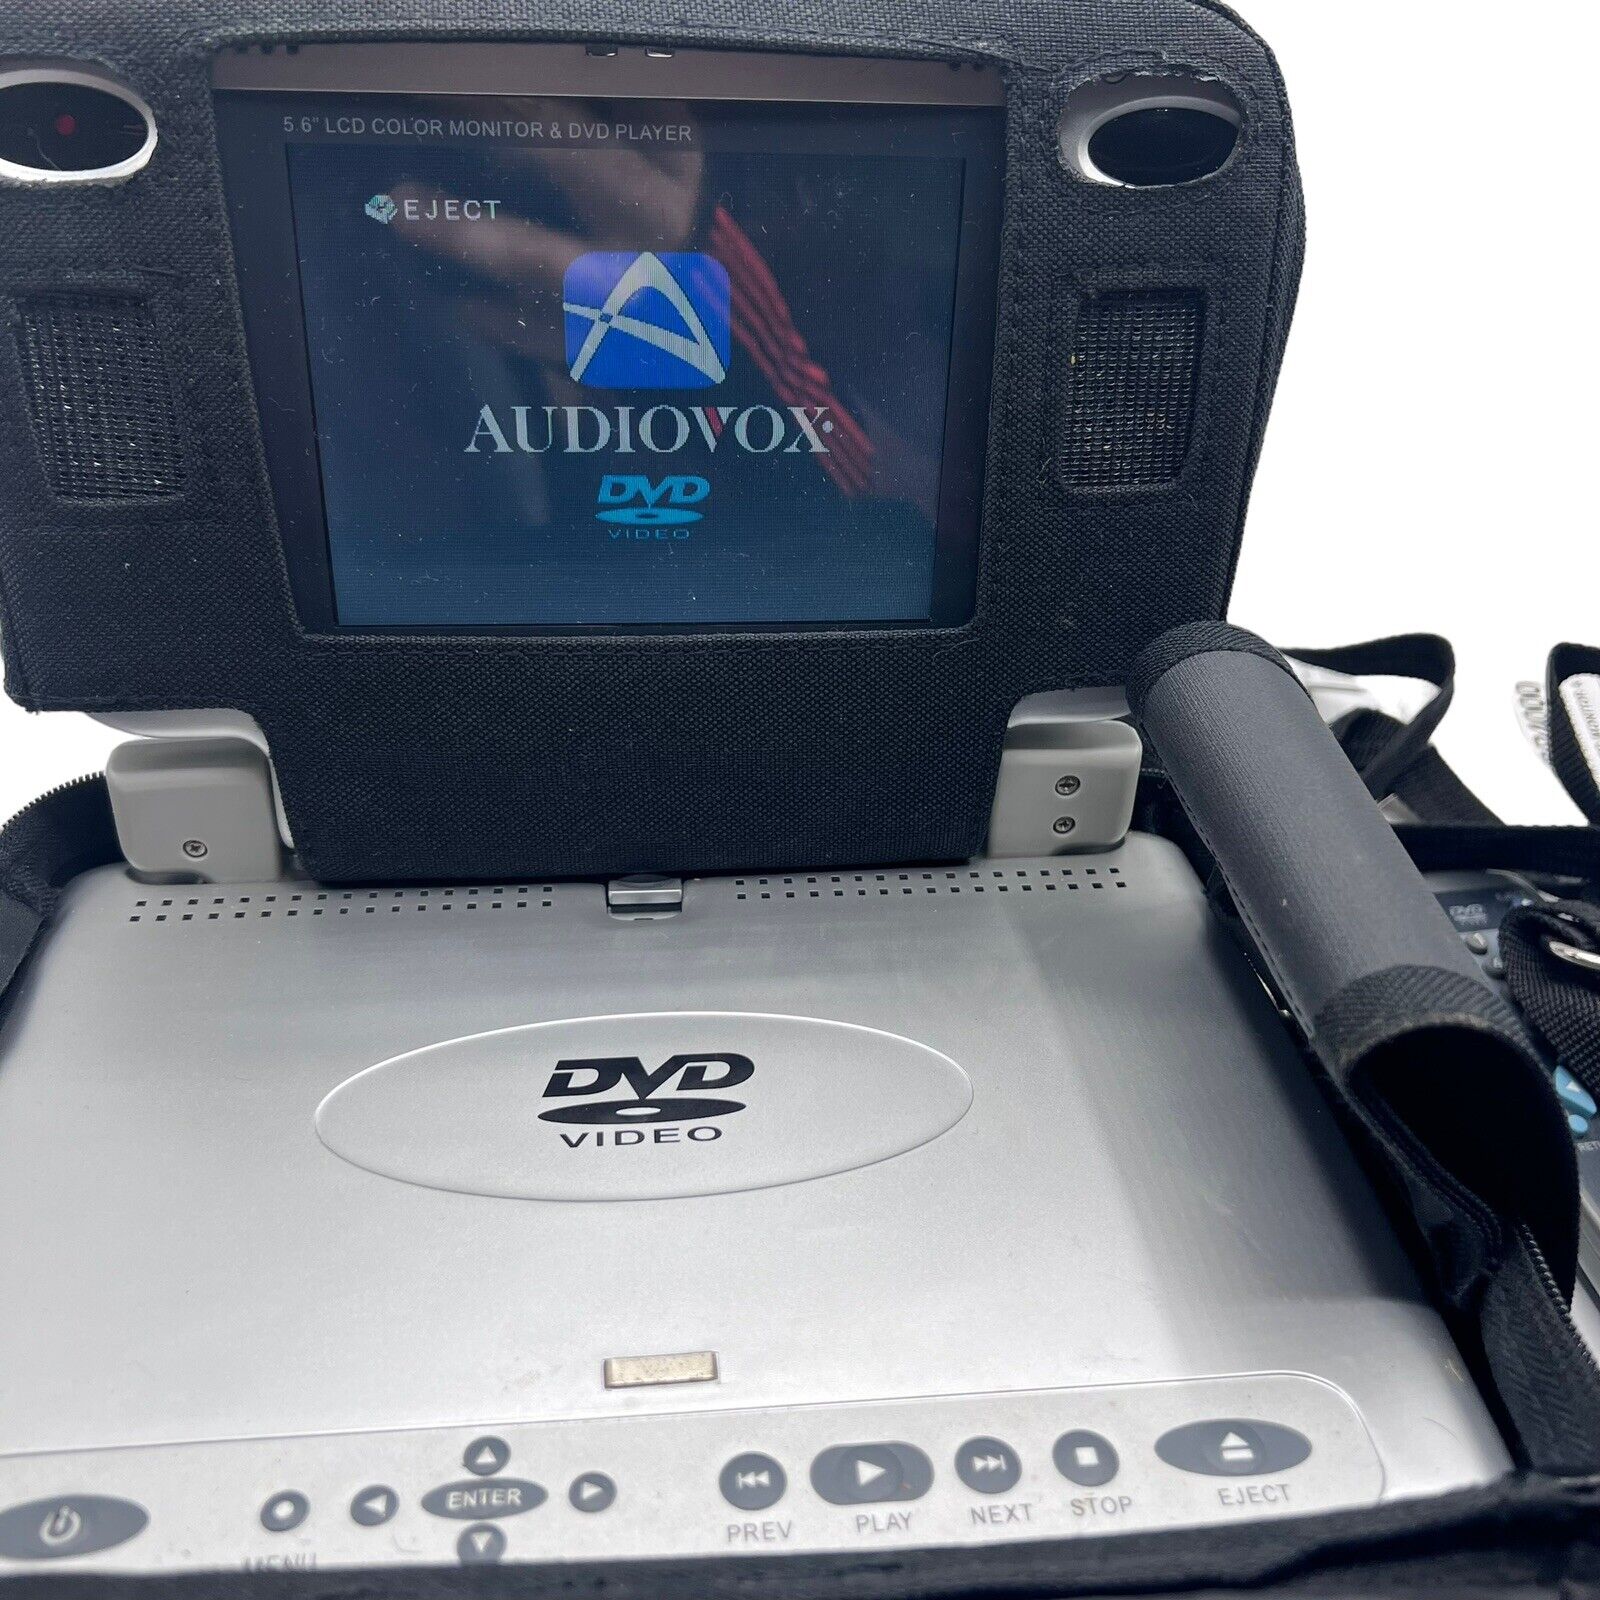 Audiovox 5.6” LCD Color Monitor DVD Player VBP4000 Case Remote Adapter